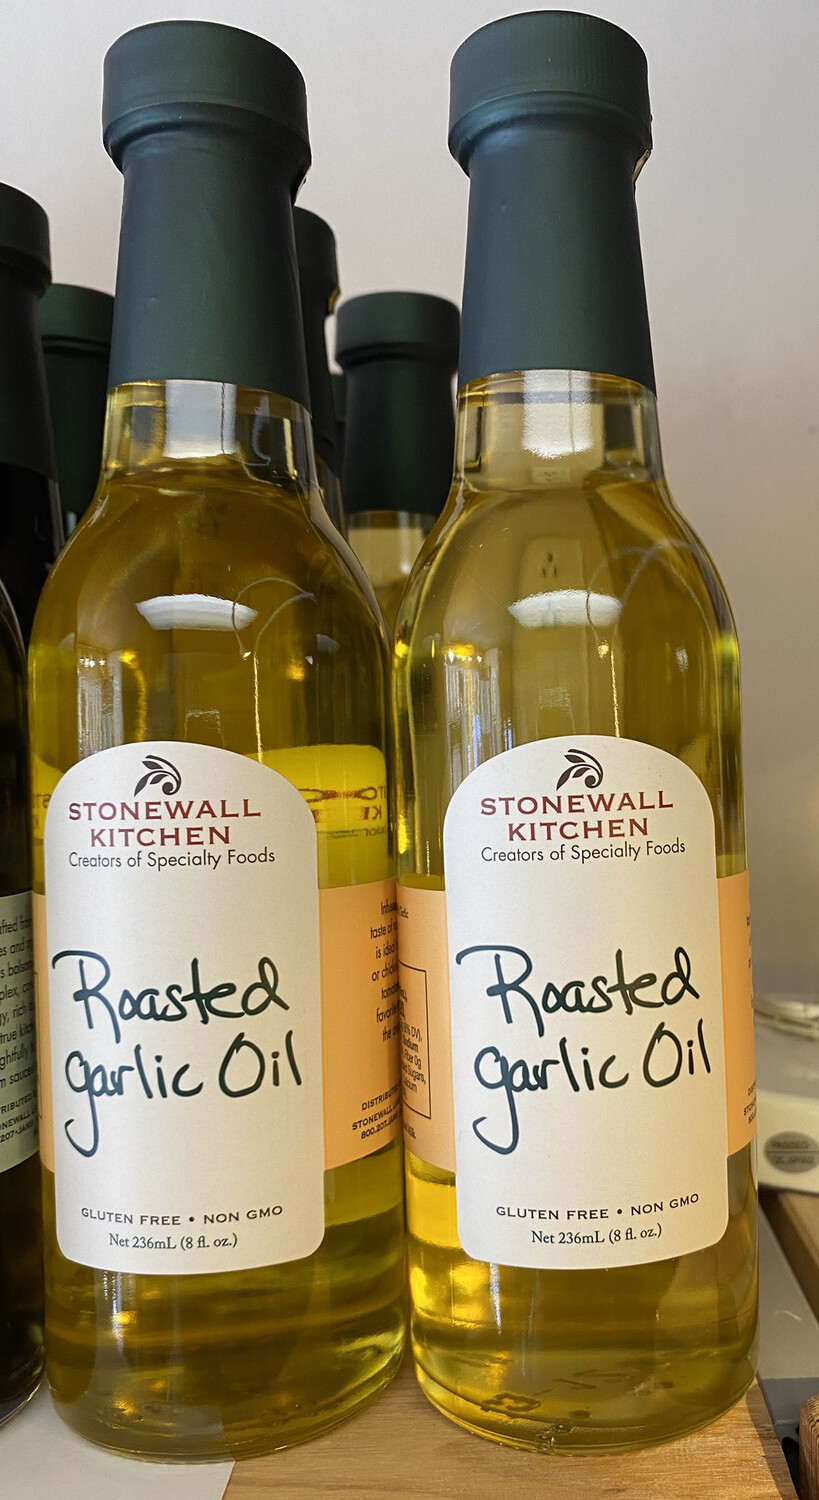 Stonewall Kitchen Roasted garlic Oil Add Deeper Flavor To any dish